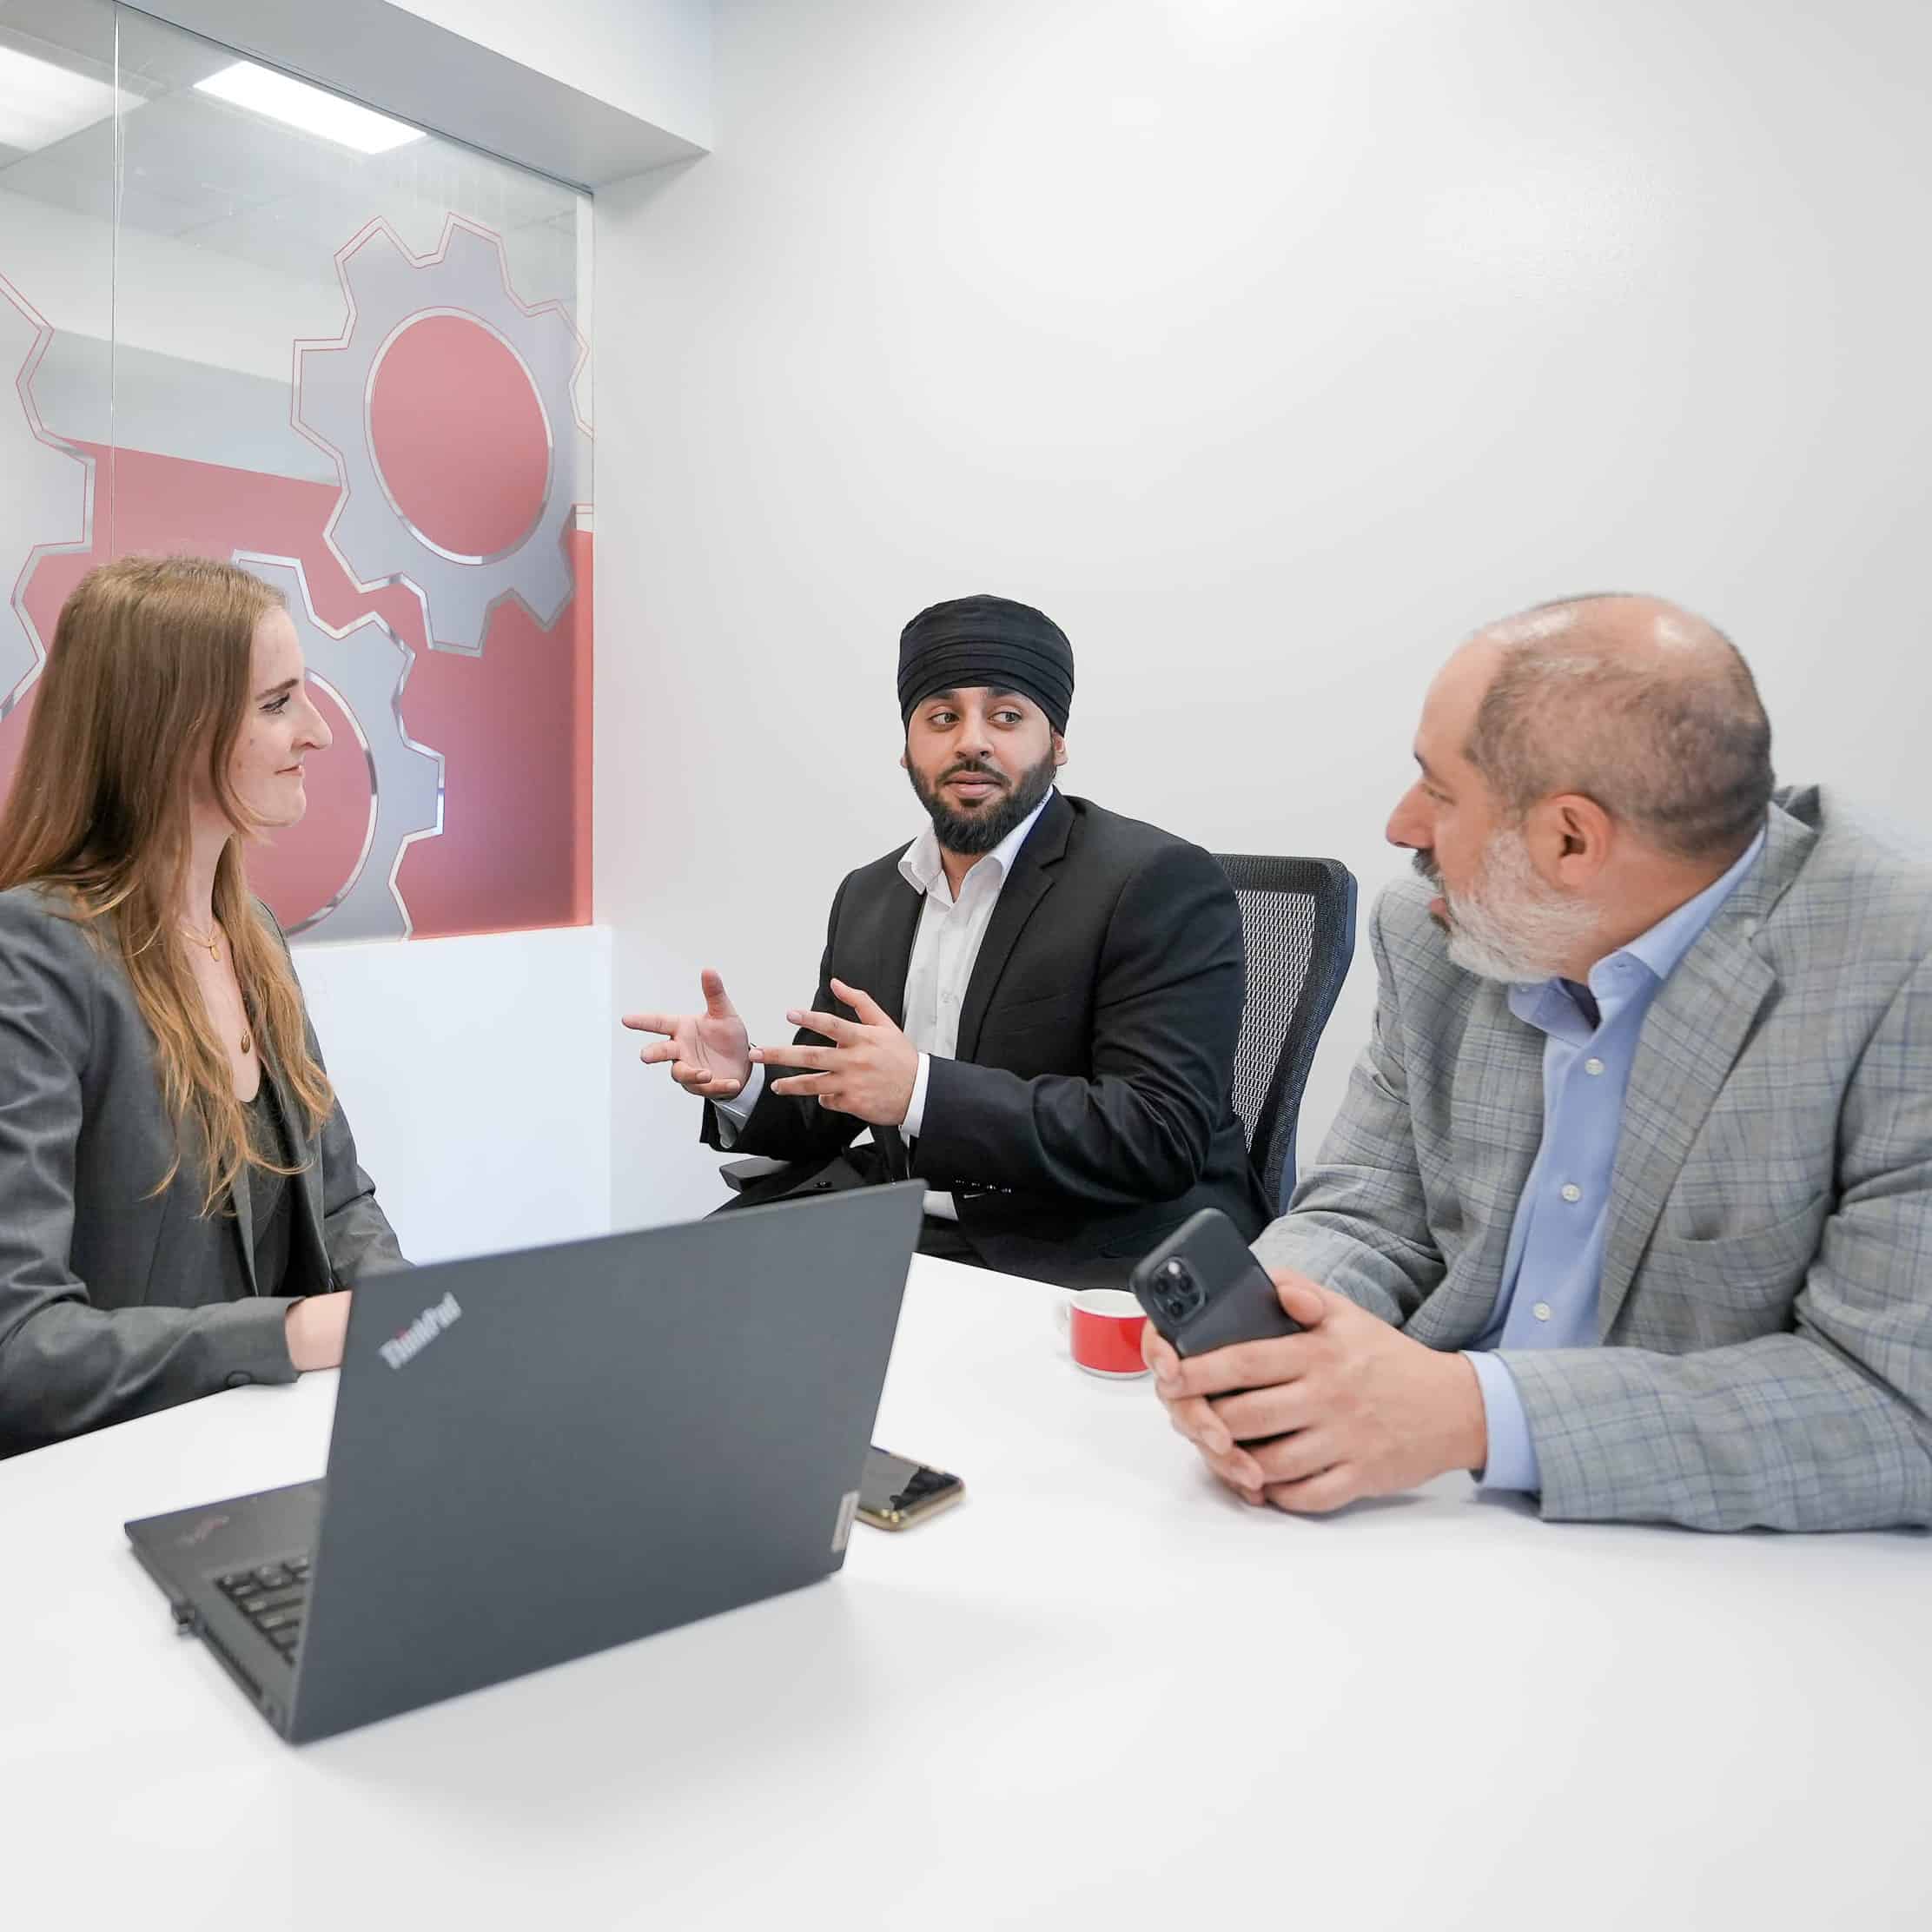 Management consultants, Gursimran and Andrew, in a meeting room with marketing manager, Courtney